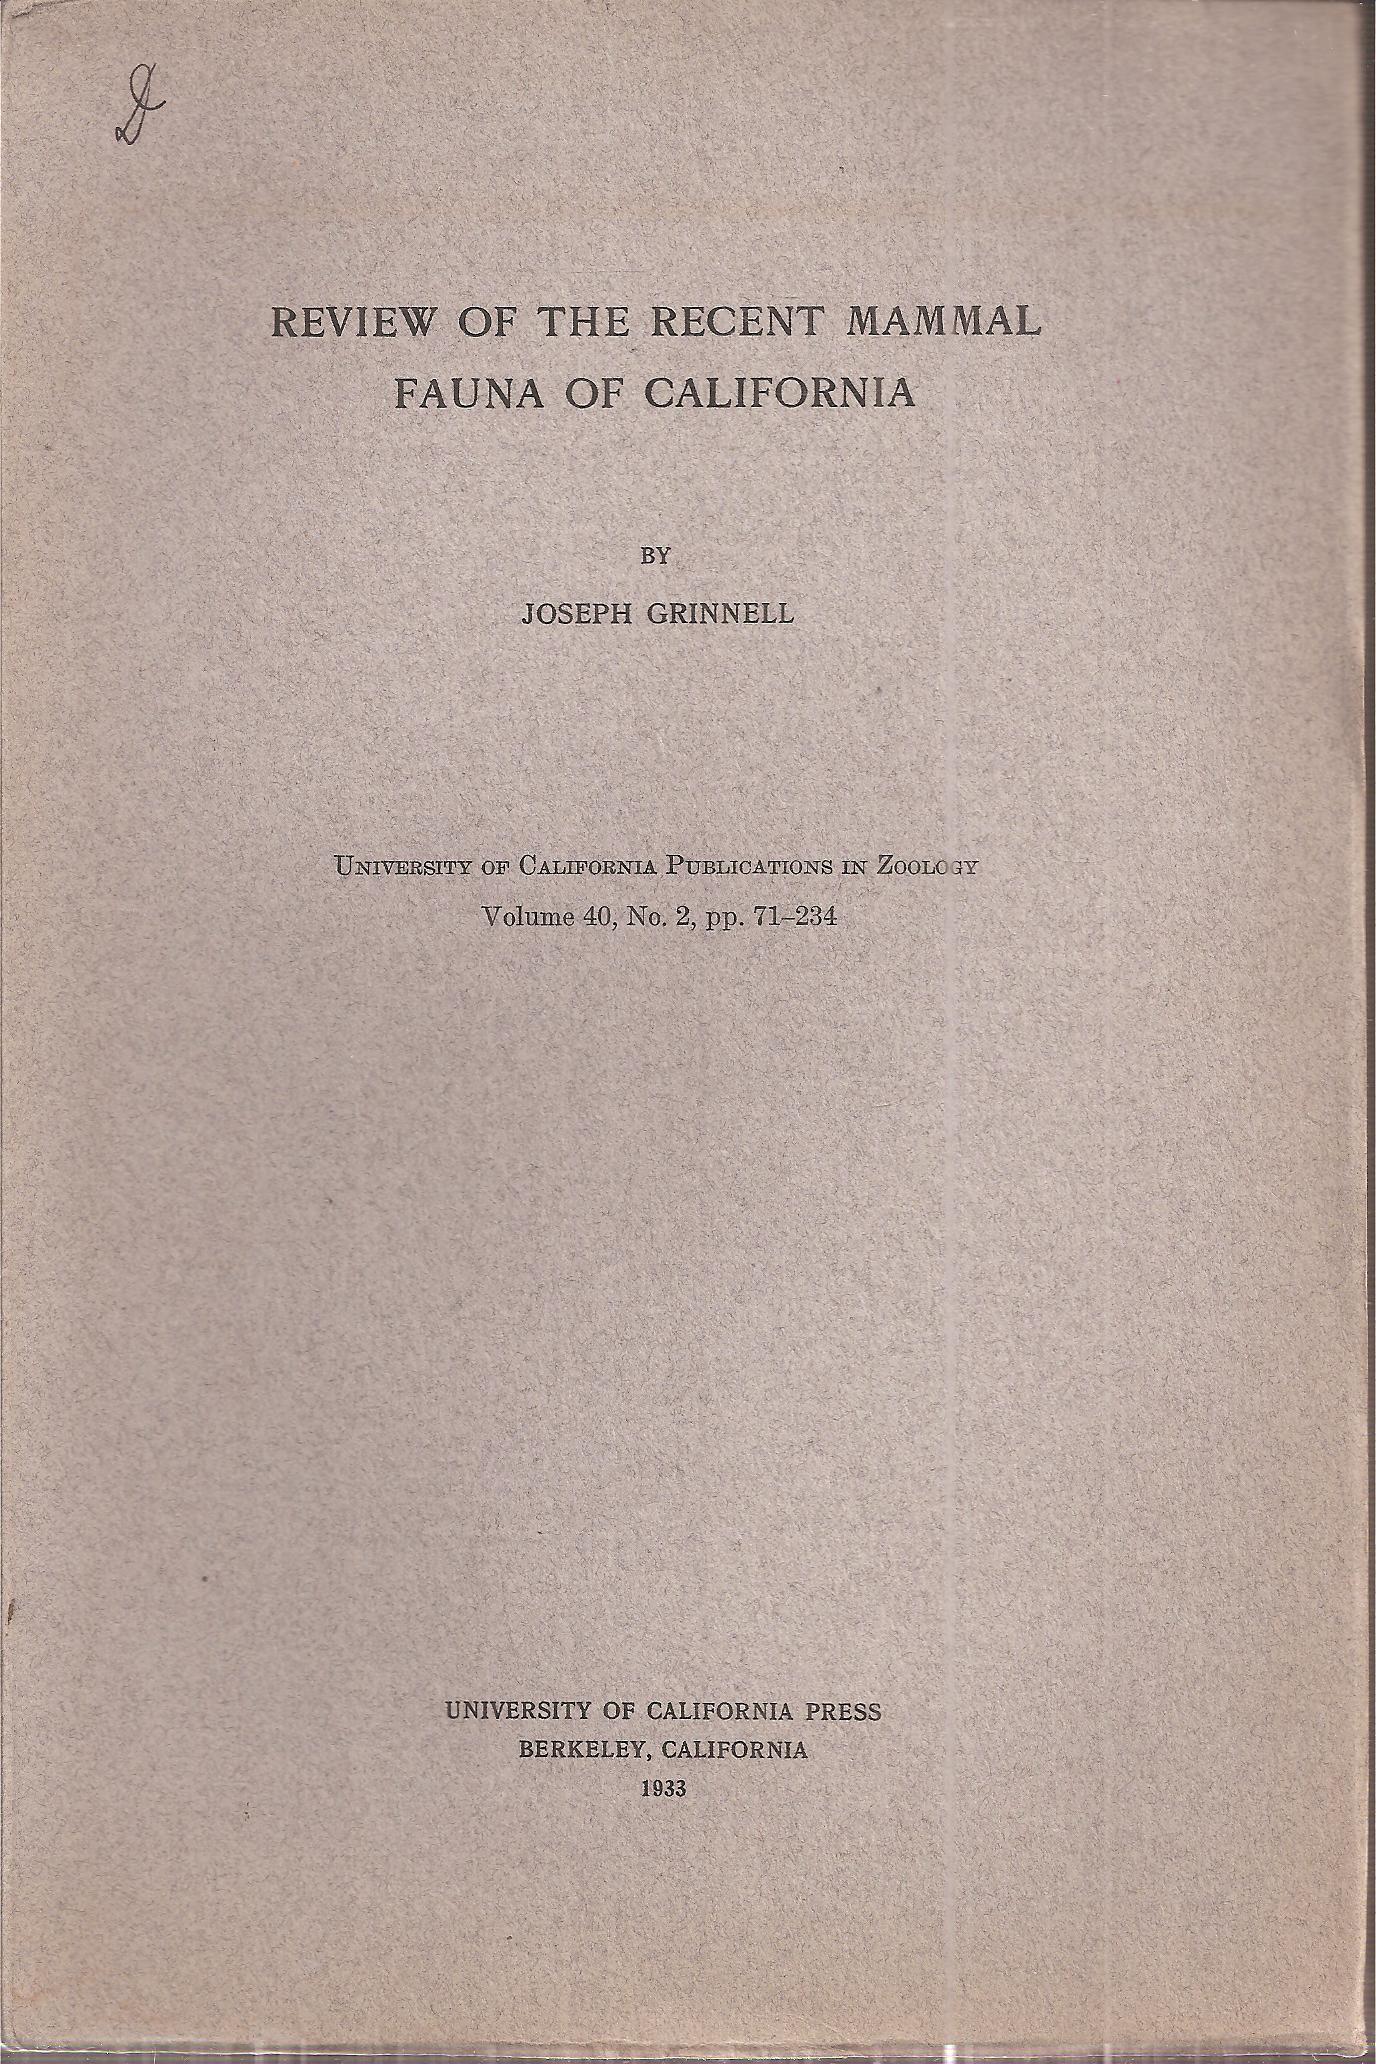 Grinnell,Joseph  Review of the Recent Mammal Fauna of California 